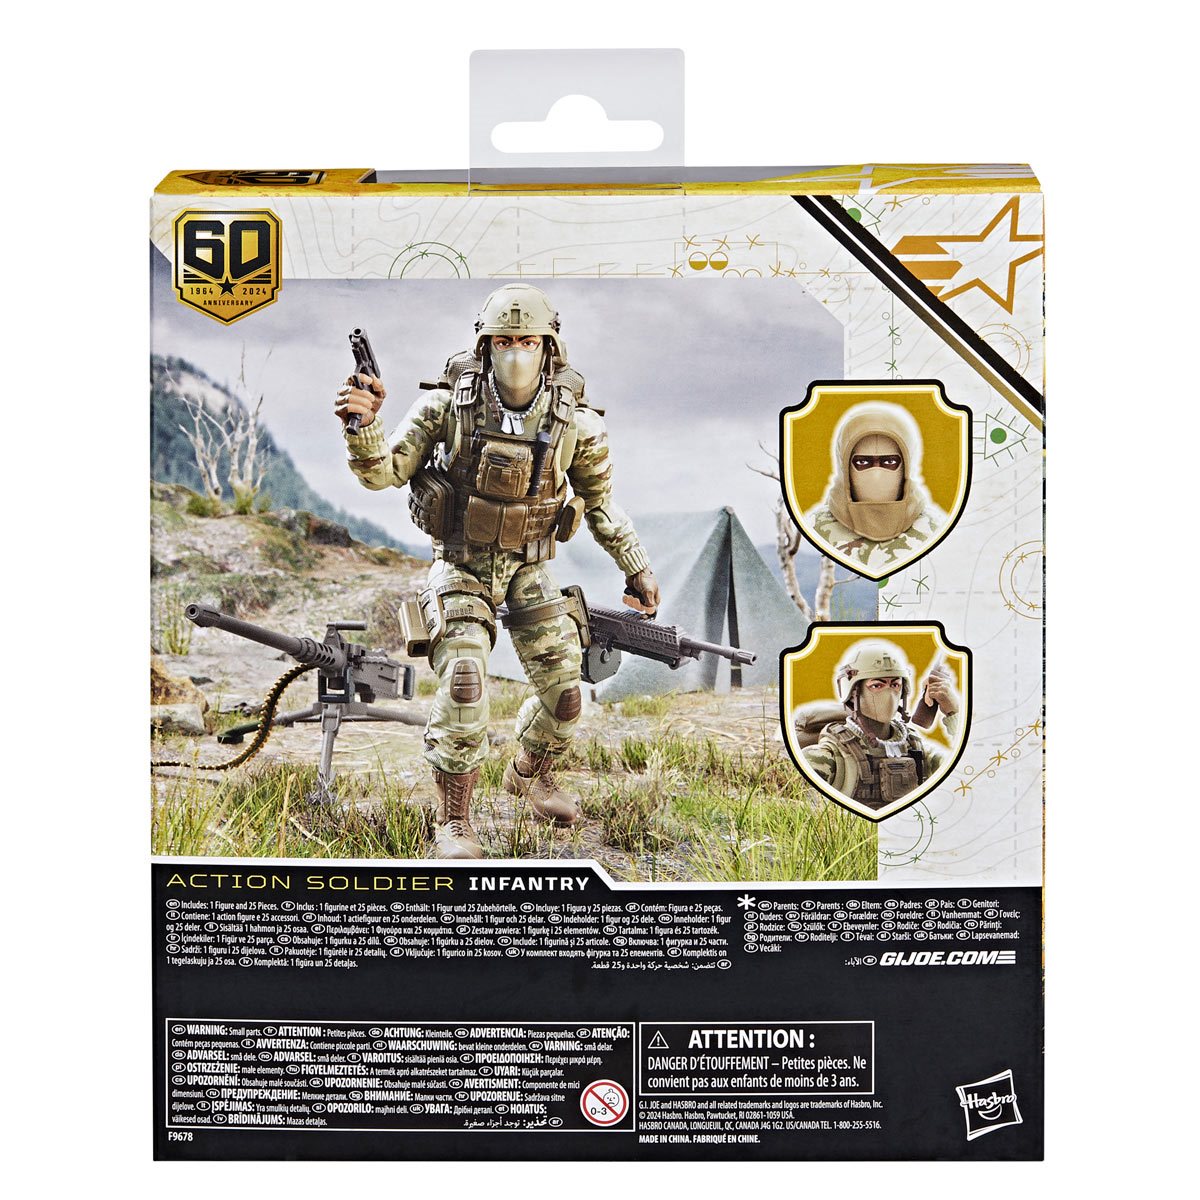 G.I. Joe Classified 60th Anniversary Action Soldier